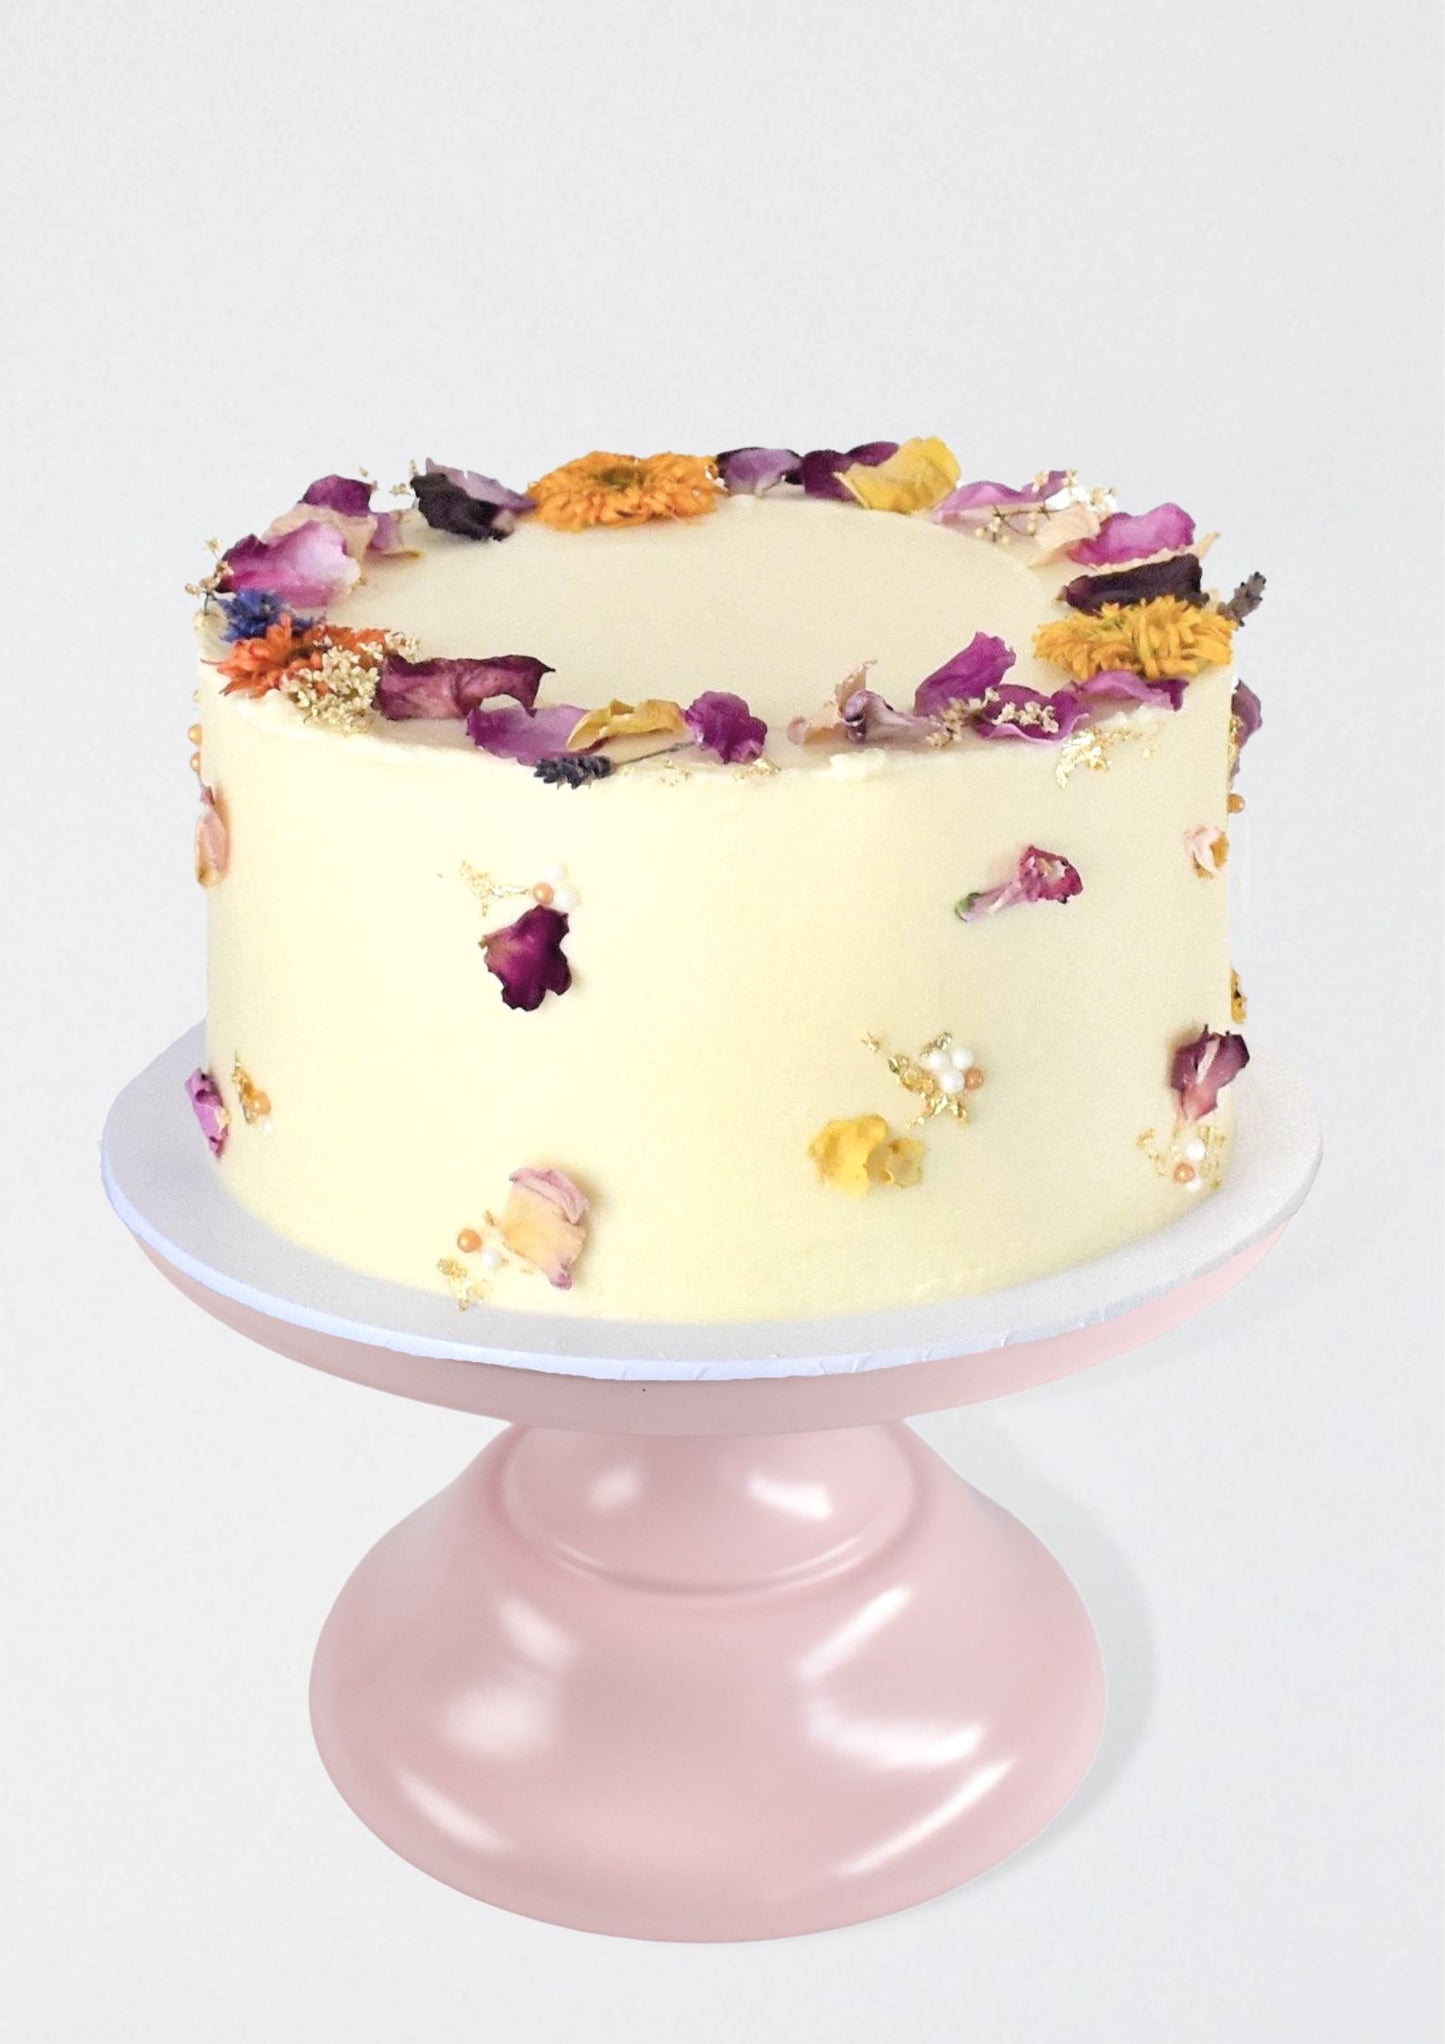 Vintage Floral DIY Cake Kit, Locally Sourced Edible Dried Flowers, Gold Leaf, Cachous Sprinkles, Flower Cake, Vintage Cake, Floral Cake, High Tea Cake, Afternoon Tea Cake